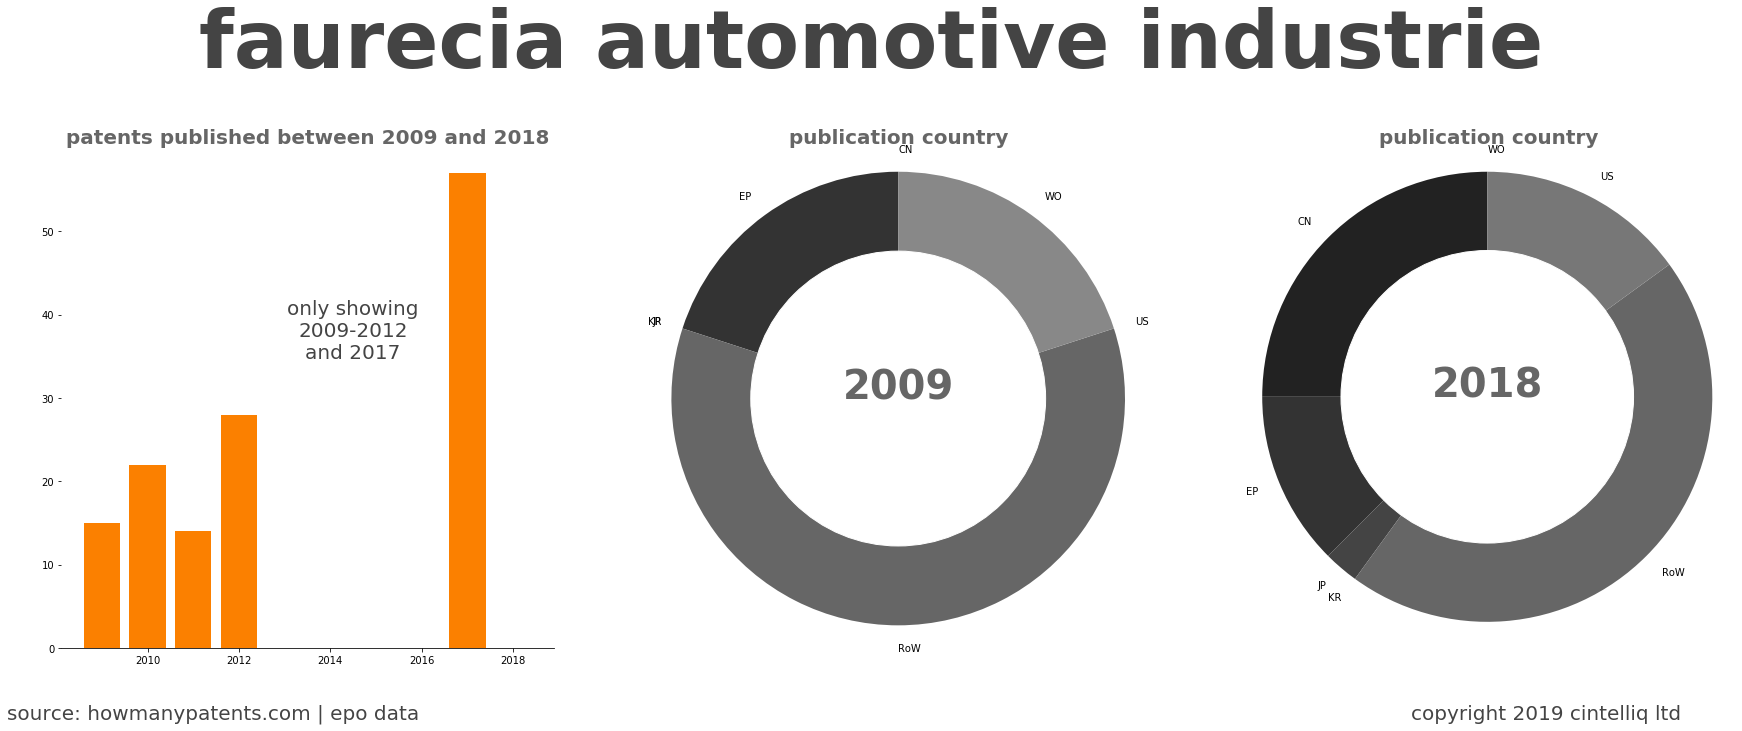 summary of patents for Faurecia Automotive Industrie